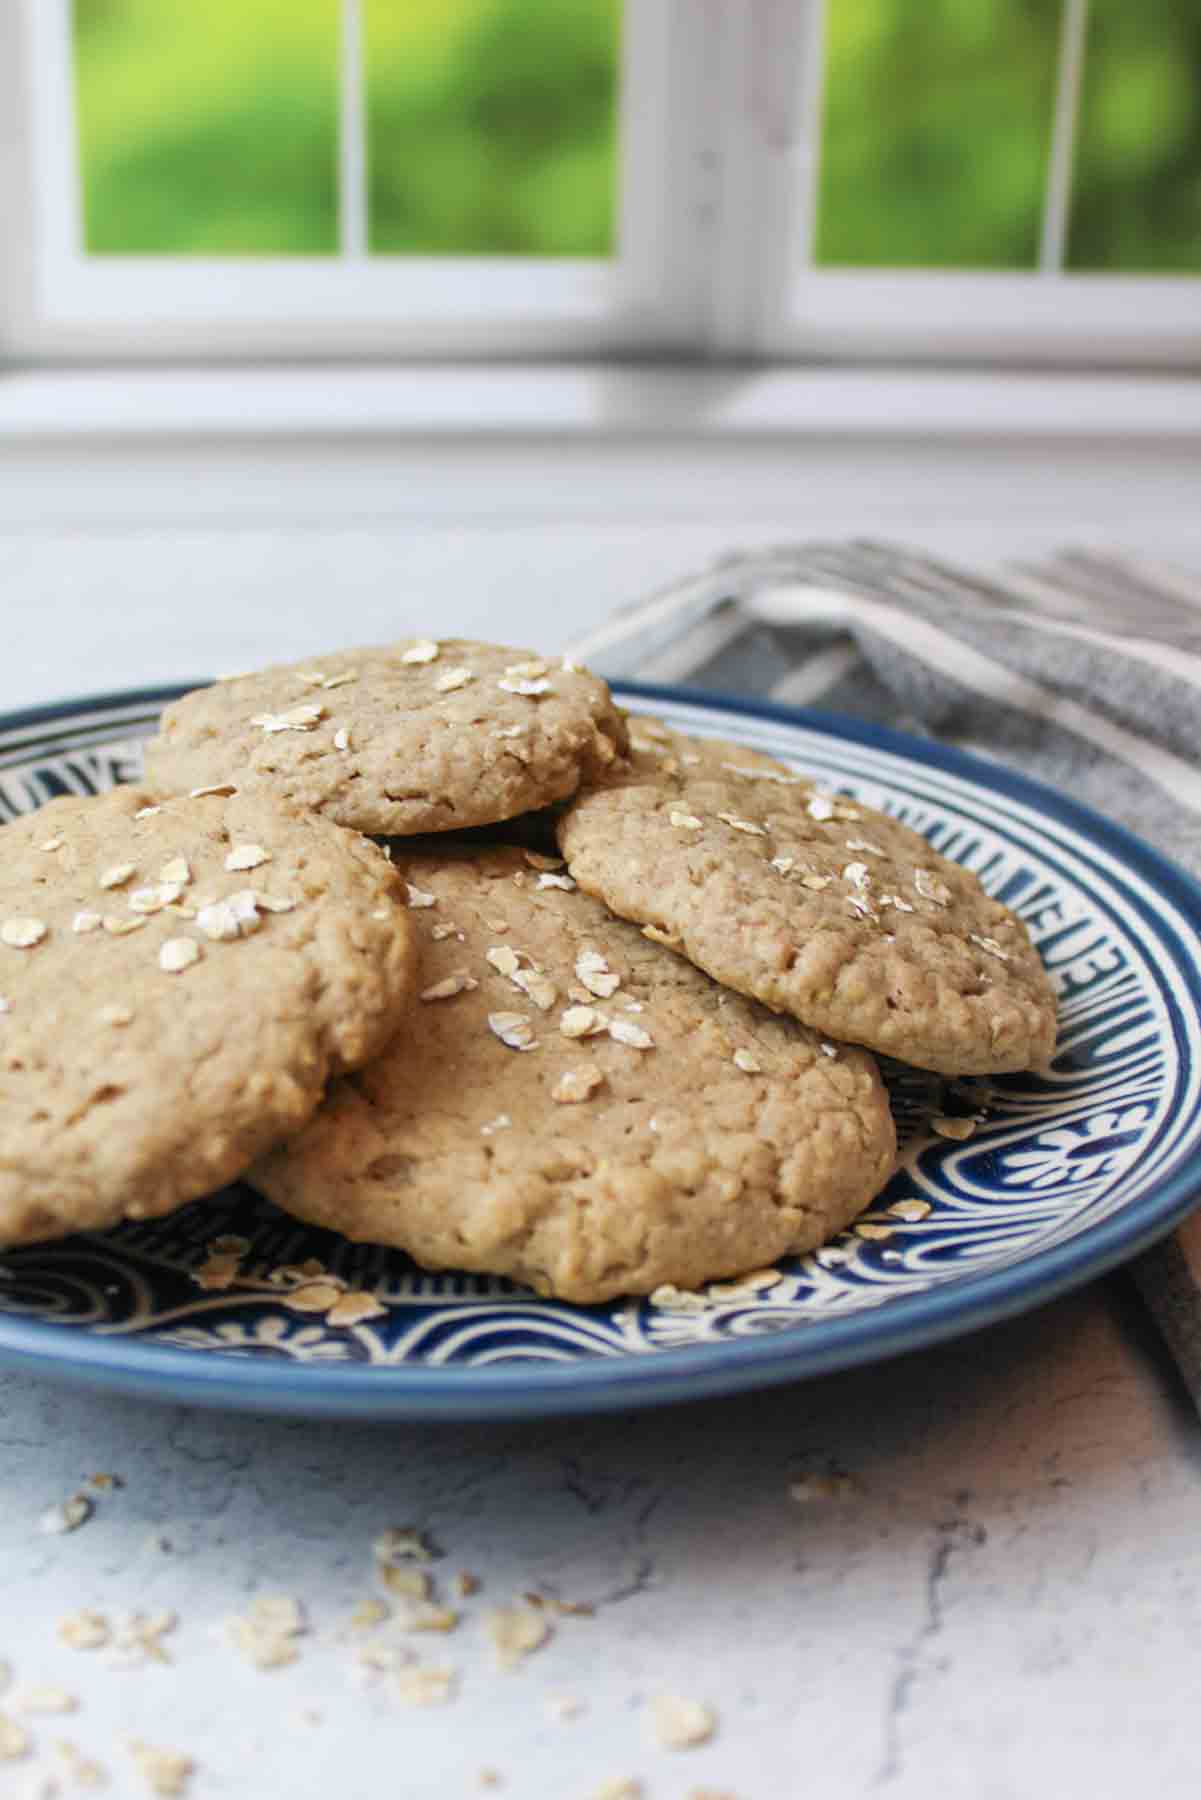 a plate of 4 ingredient oatmeal cookies on a blue plate